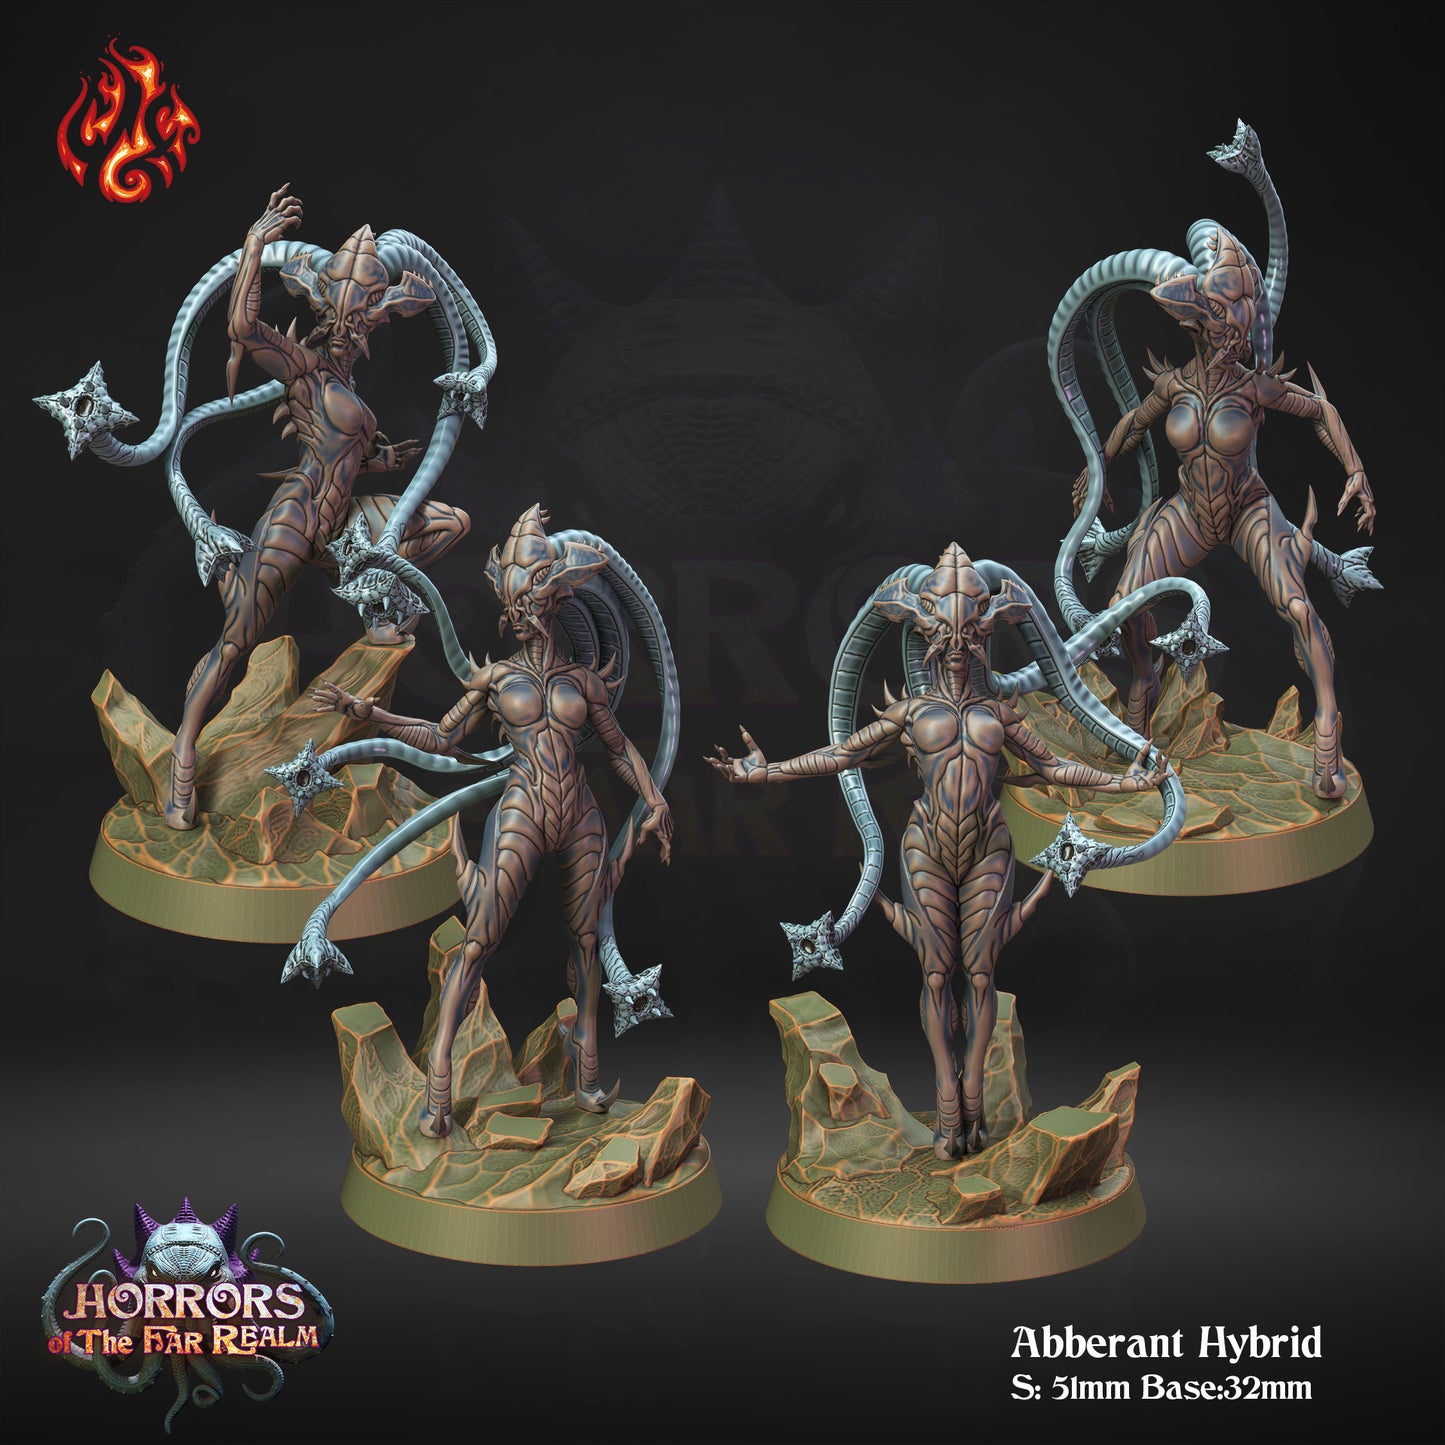 Abberant Hybrid - Horrors of the Far Realm - from Crippled God Foundry - Table-top gaming mini and collectable for painting.